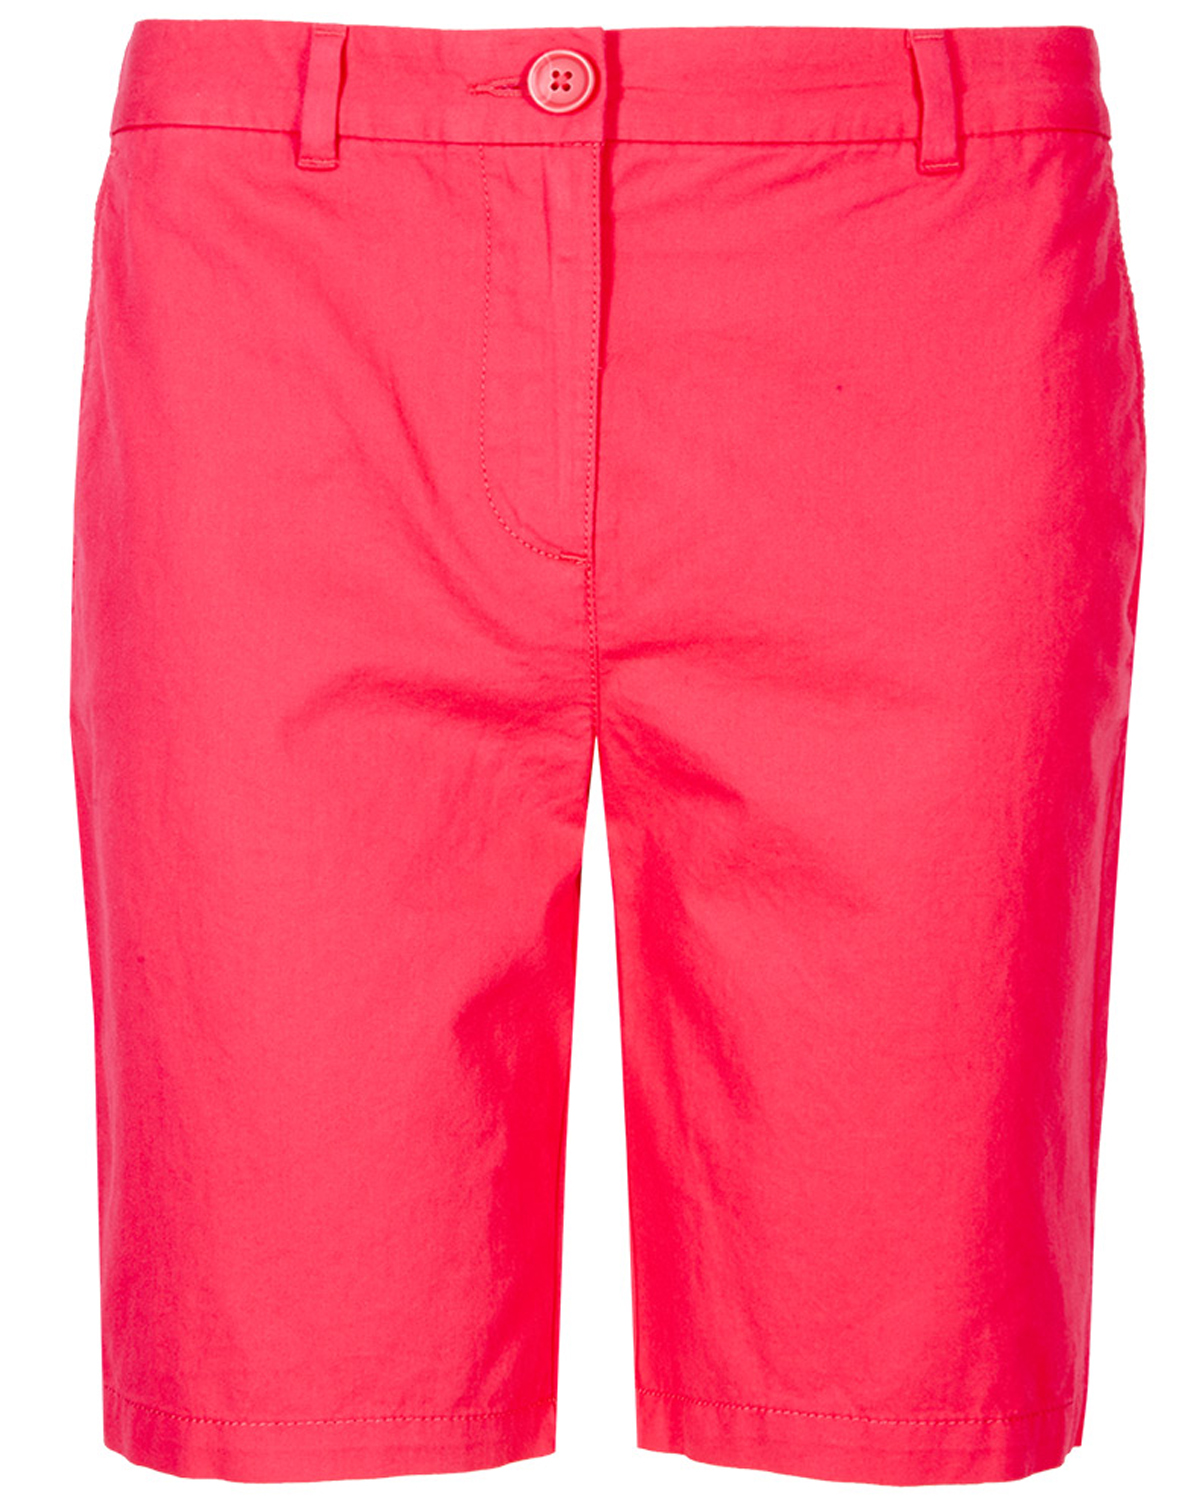 Marks and Spencer - - M&5 ASSORTED Shorts - Size 14 to 24